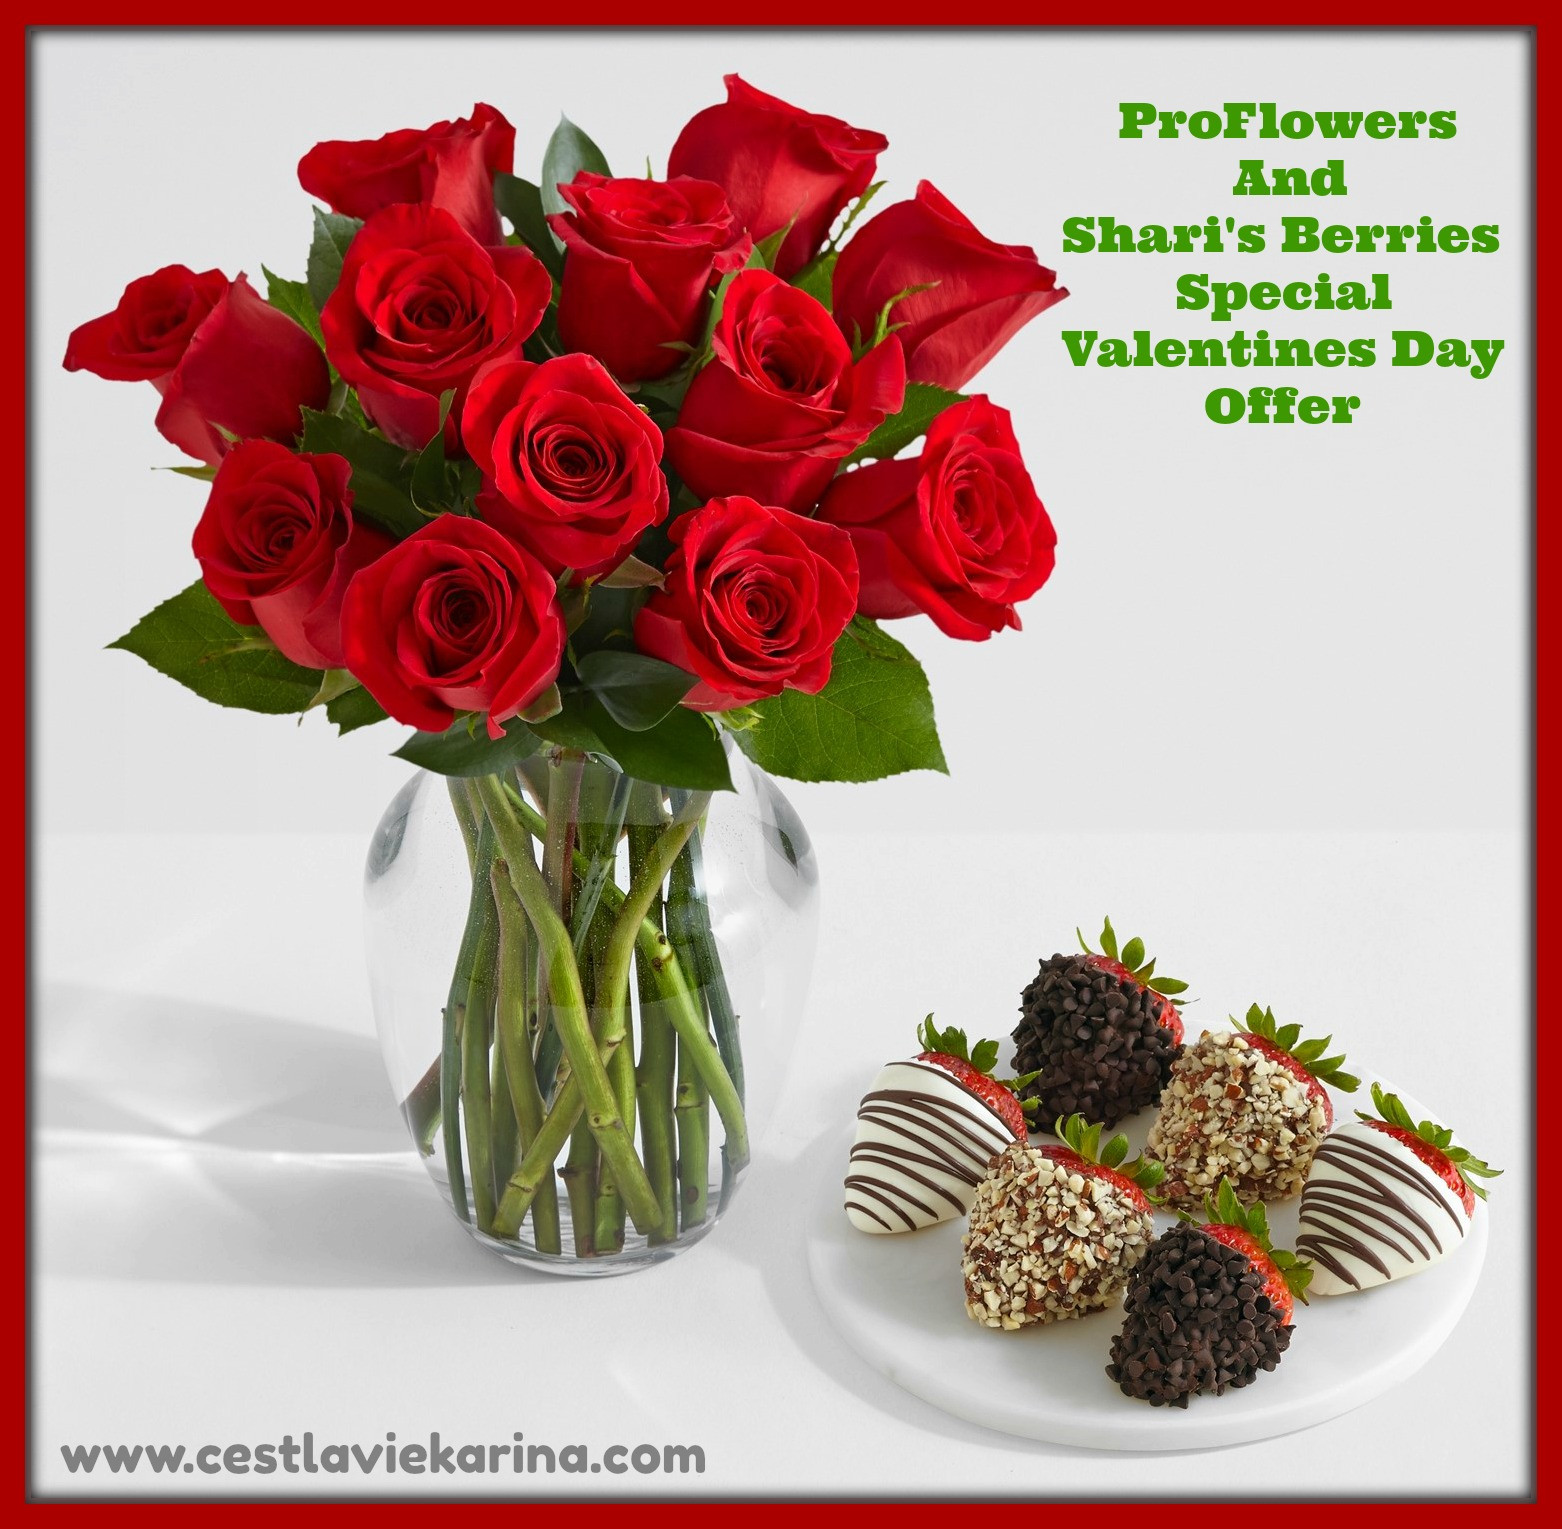 26 Ideal Proflowers Free Vase Code 2024 free download proflowers free vase code of proflowers and sharis berries special valentines day offer cest with regard to valentines day is just around the corner 10 days away to be exact and now is the p